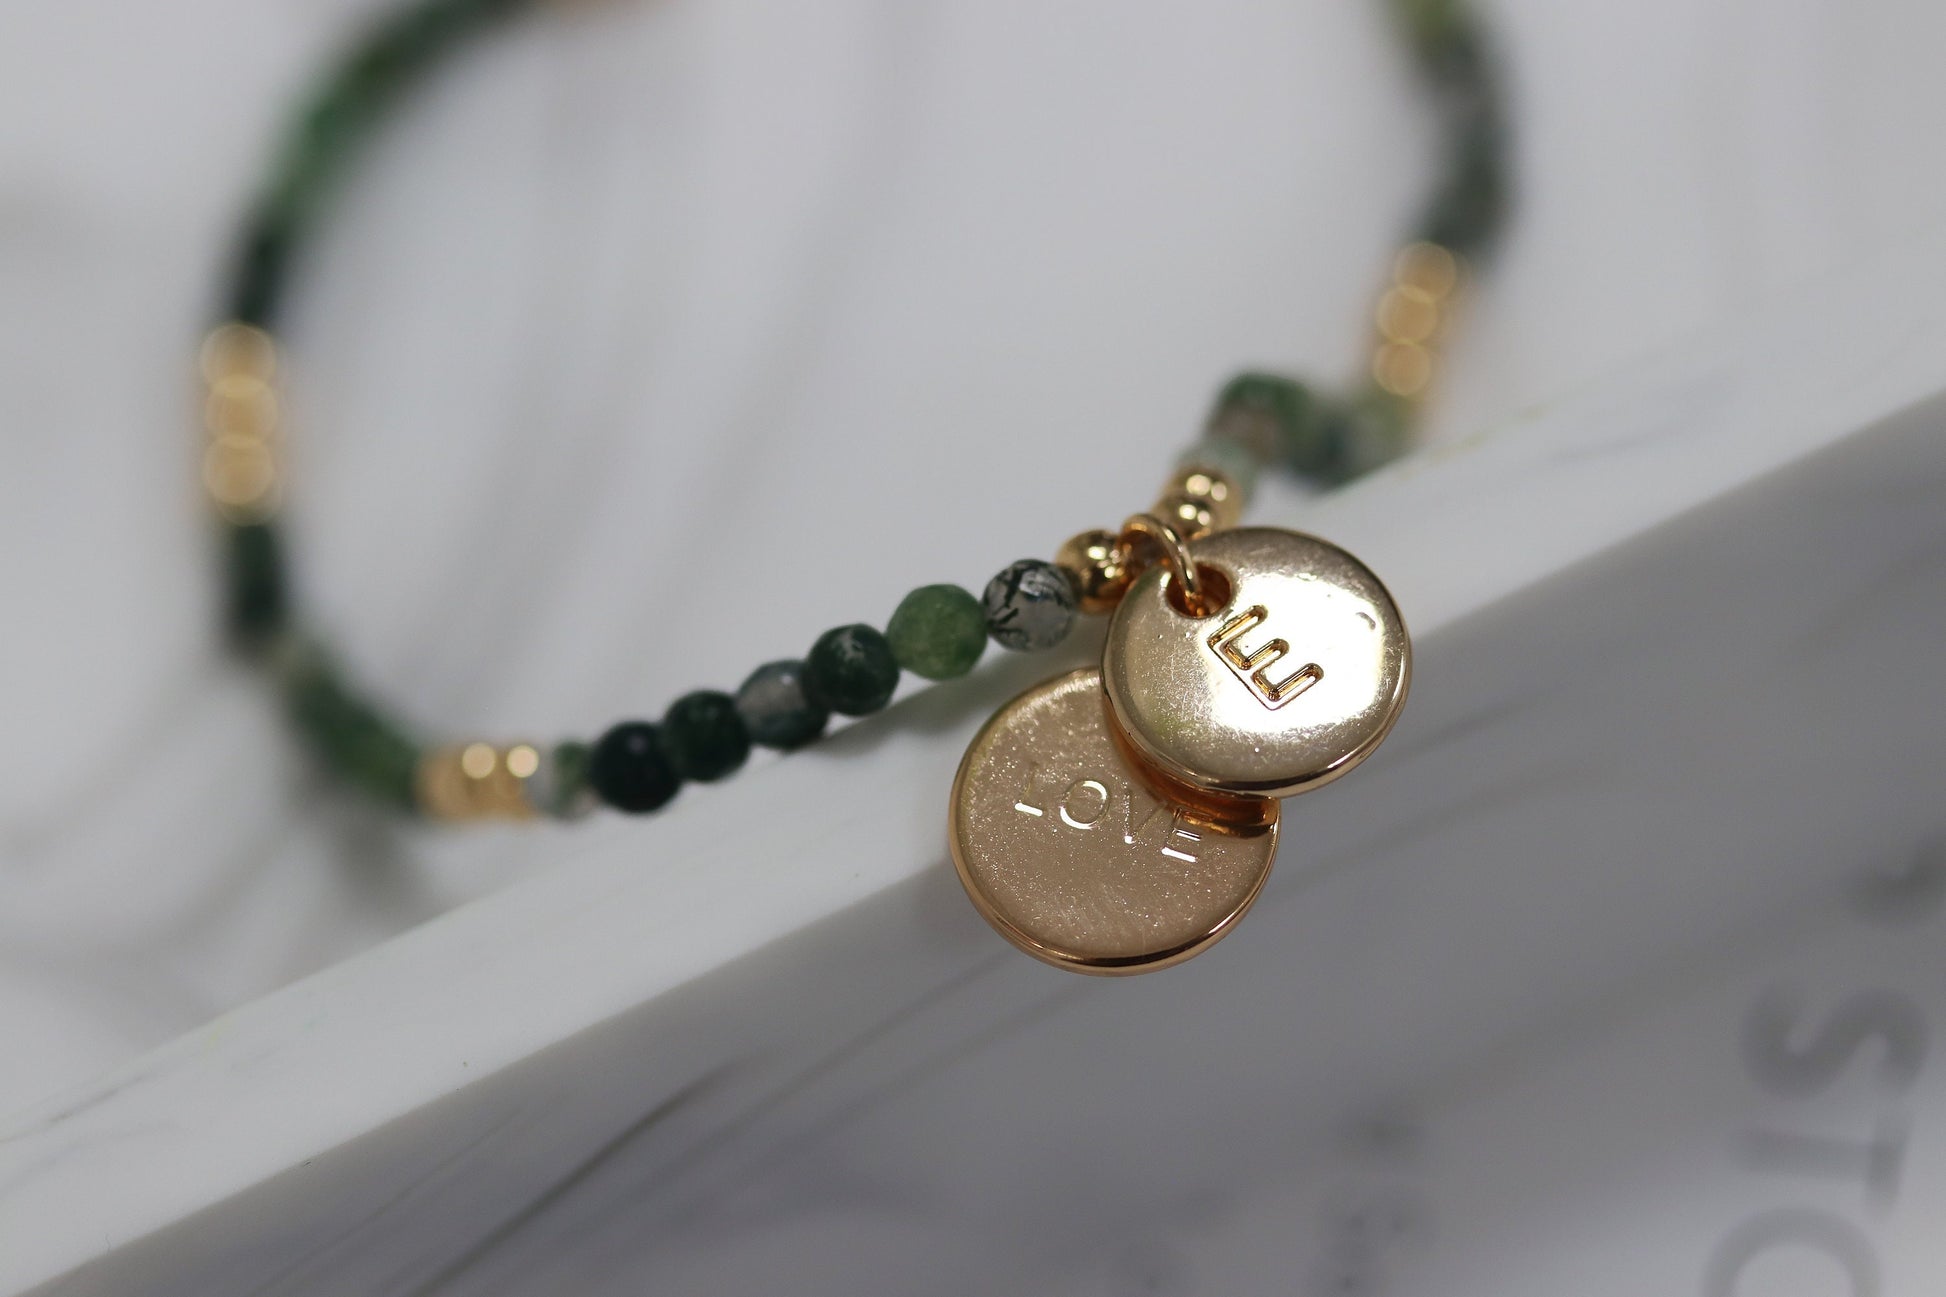 Personalised Auntie Bracelet, Initial Charm Bracelet, Gold Emerald Beads Bangle, Stackable Gemstone Bracelet, Auntie Birthday Gift for Her